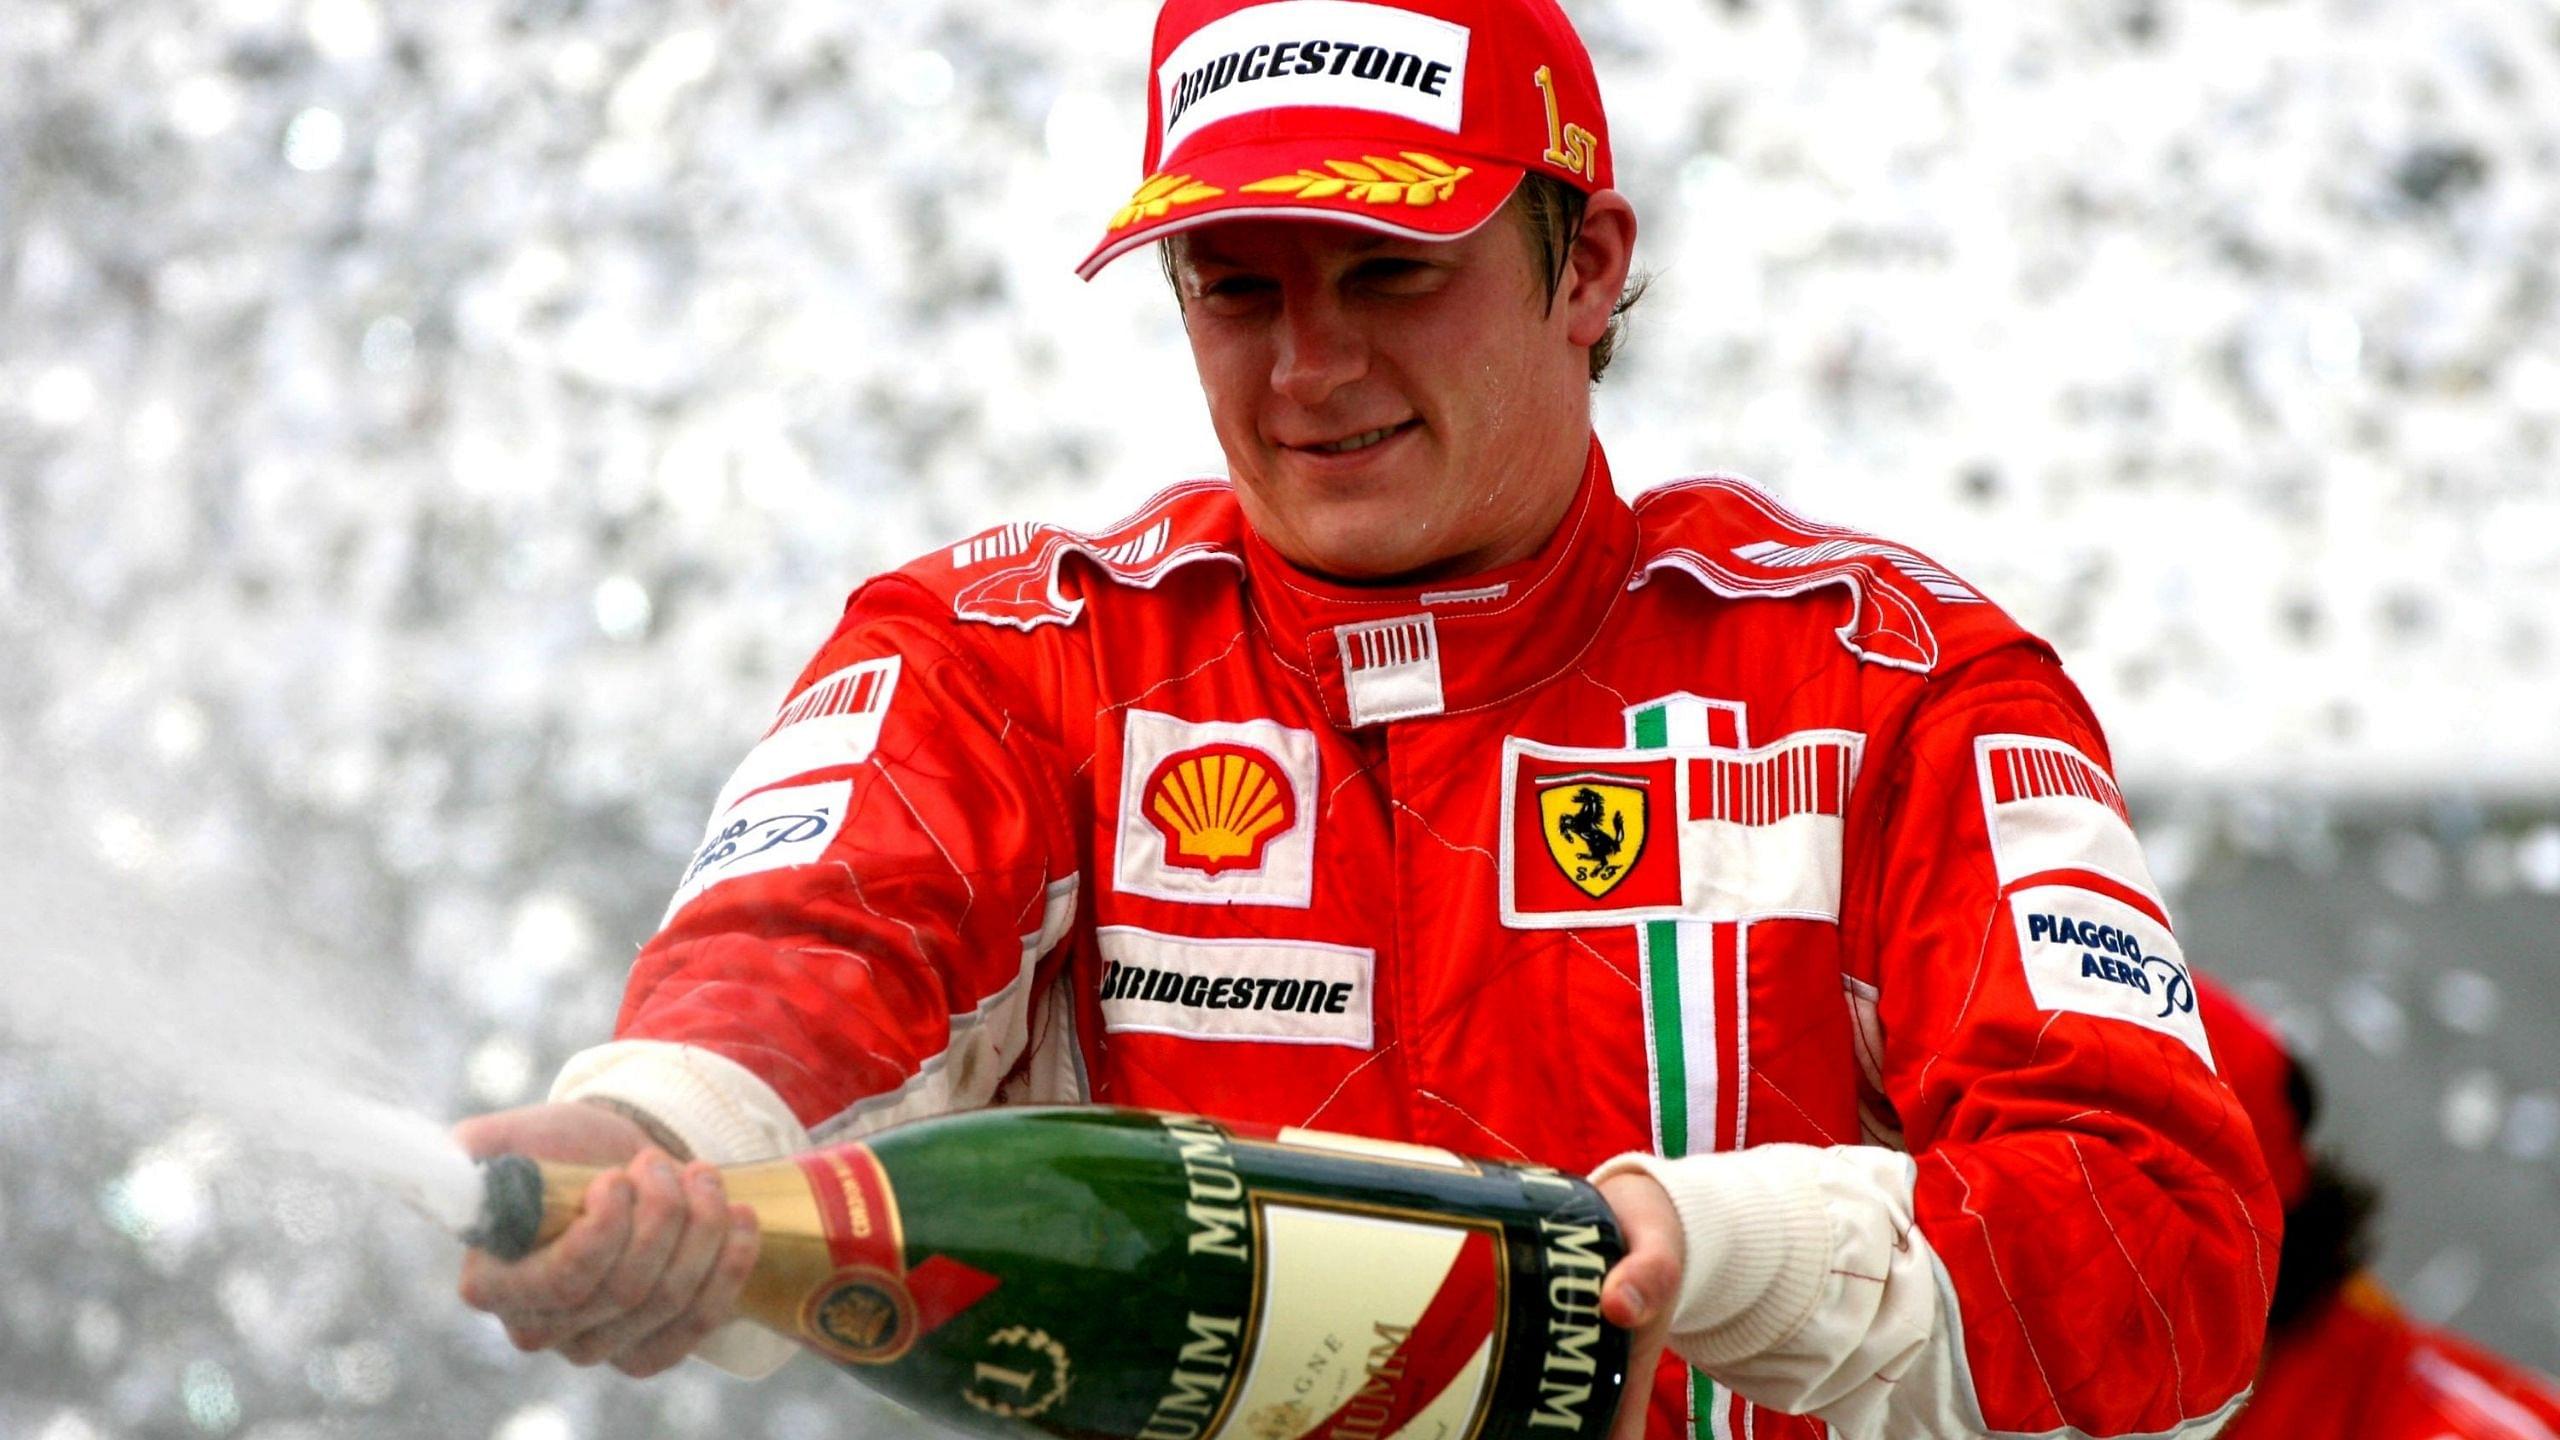 When can Ferrari return to prominence in Formula 1, and end Mercedes unprecedented dominance?